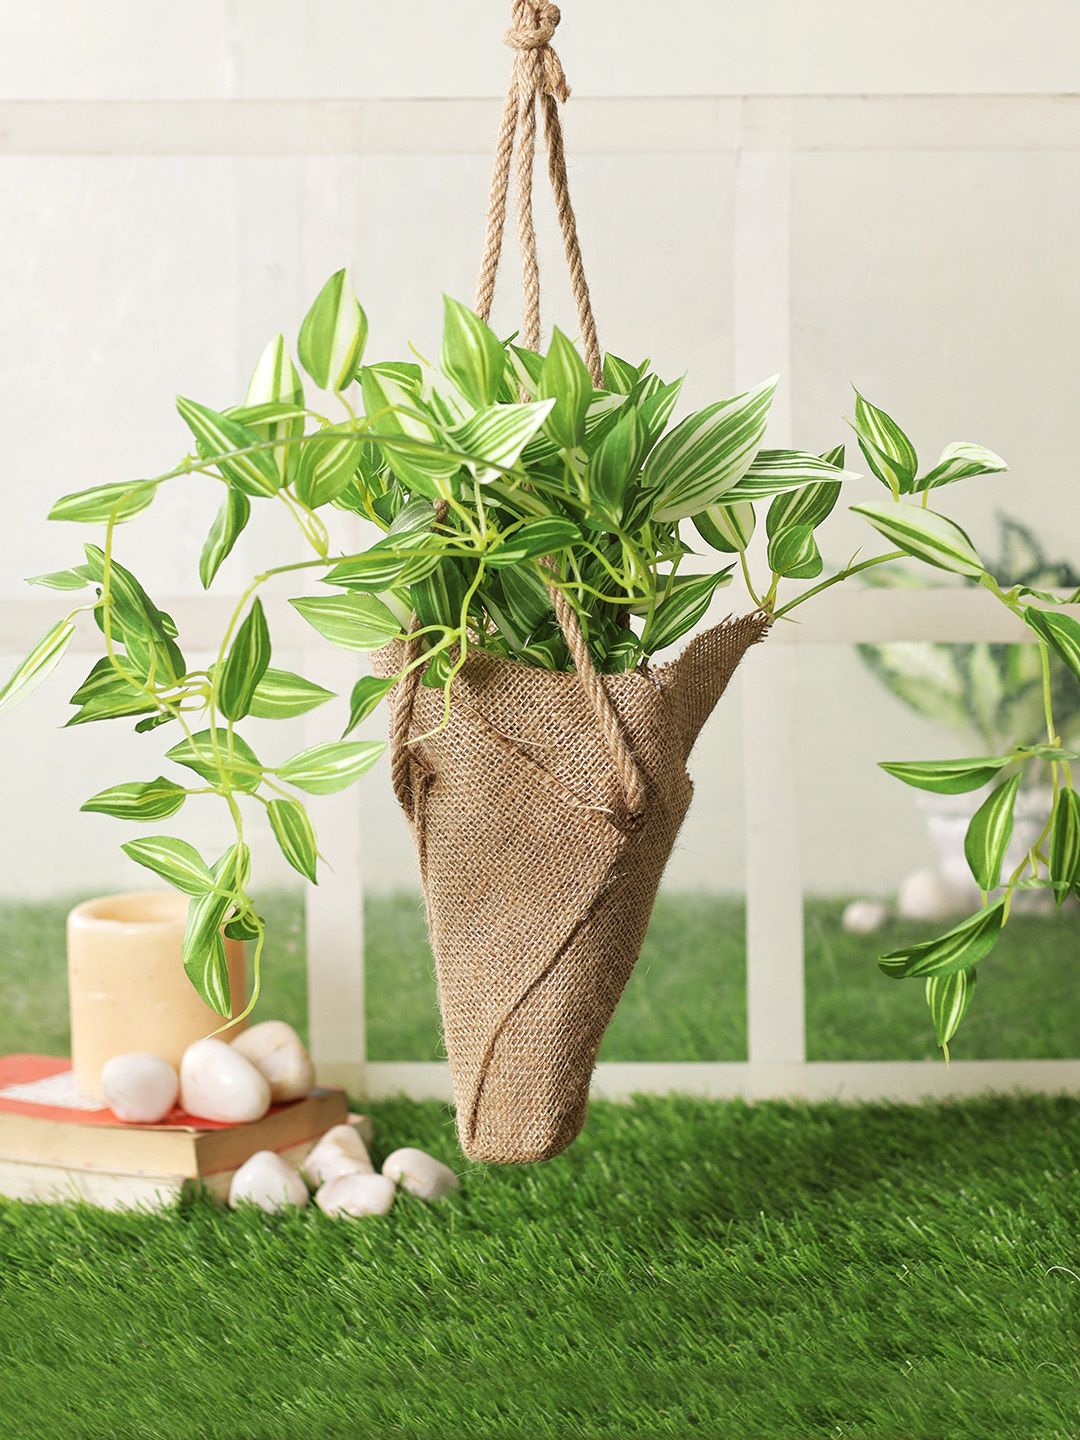 PolliNation Green Artificial Creeper Bonsai Plant with Brown Jute Bag Price in India